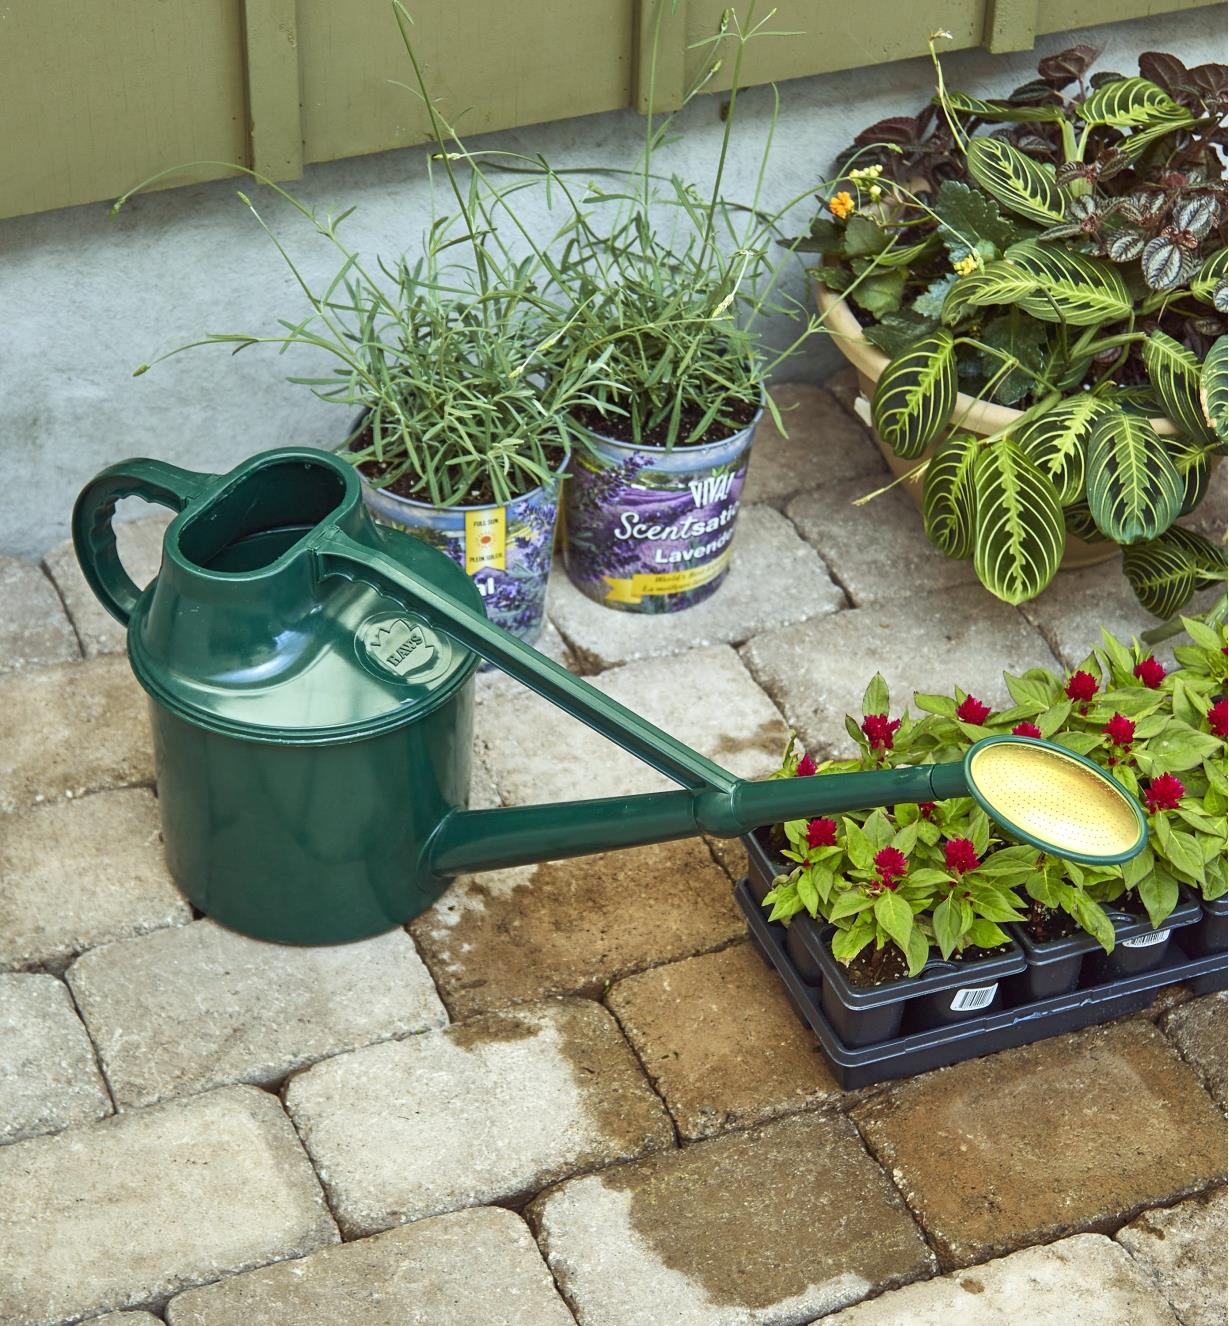 A Haws plastic watering can placed next to bedding plants